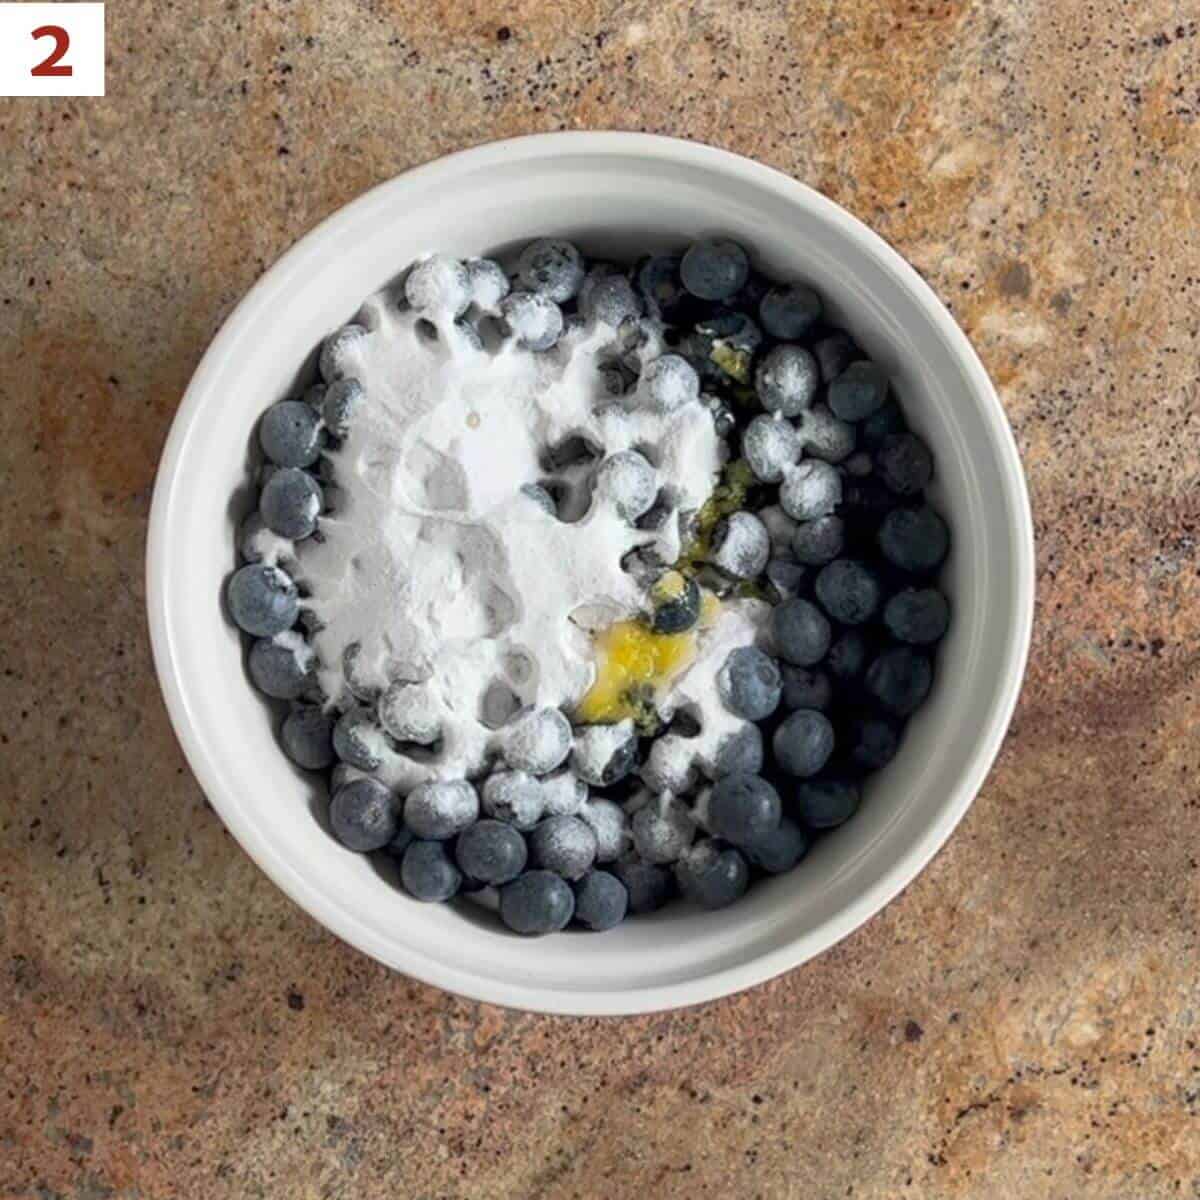 Tossing blueberries with sugar mixture and lemon juice & zest.